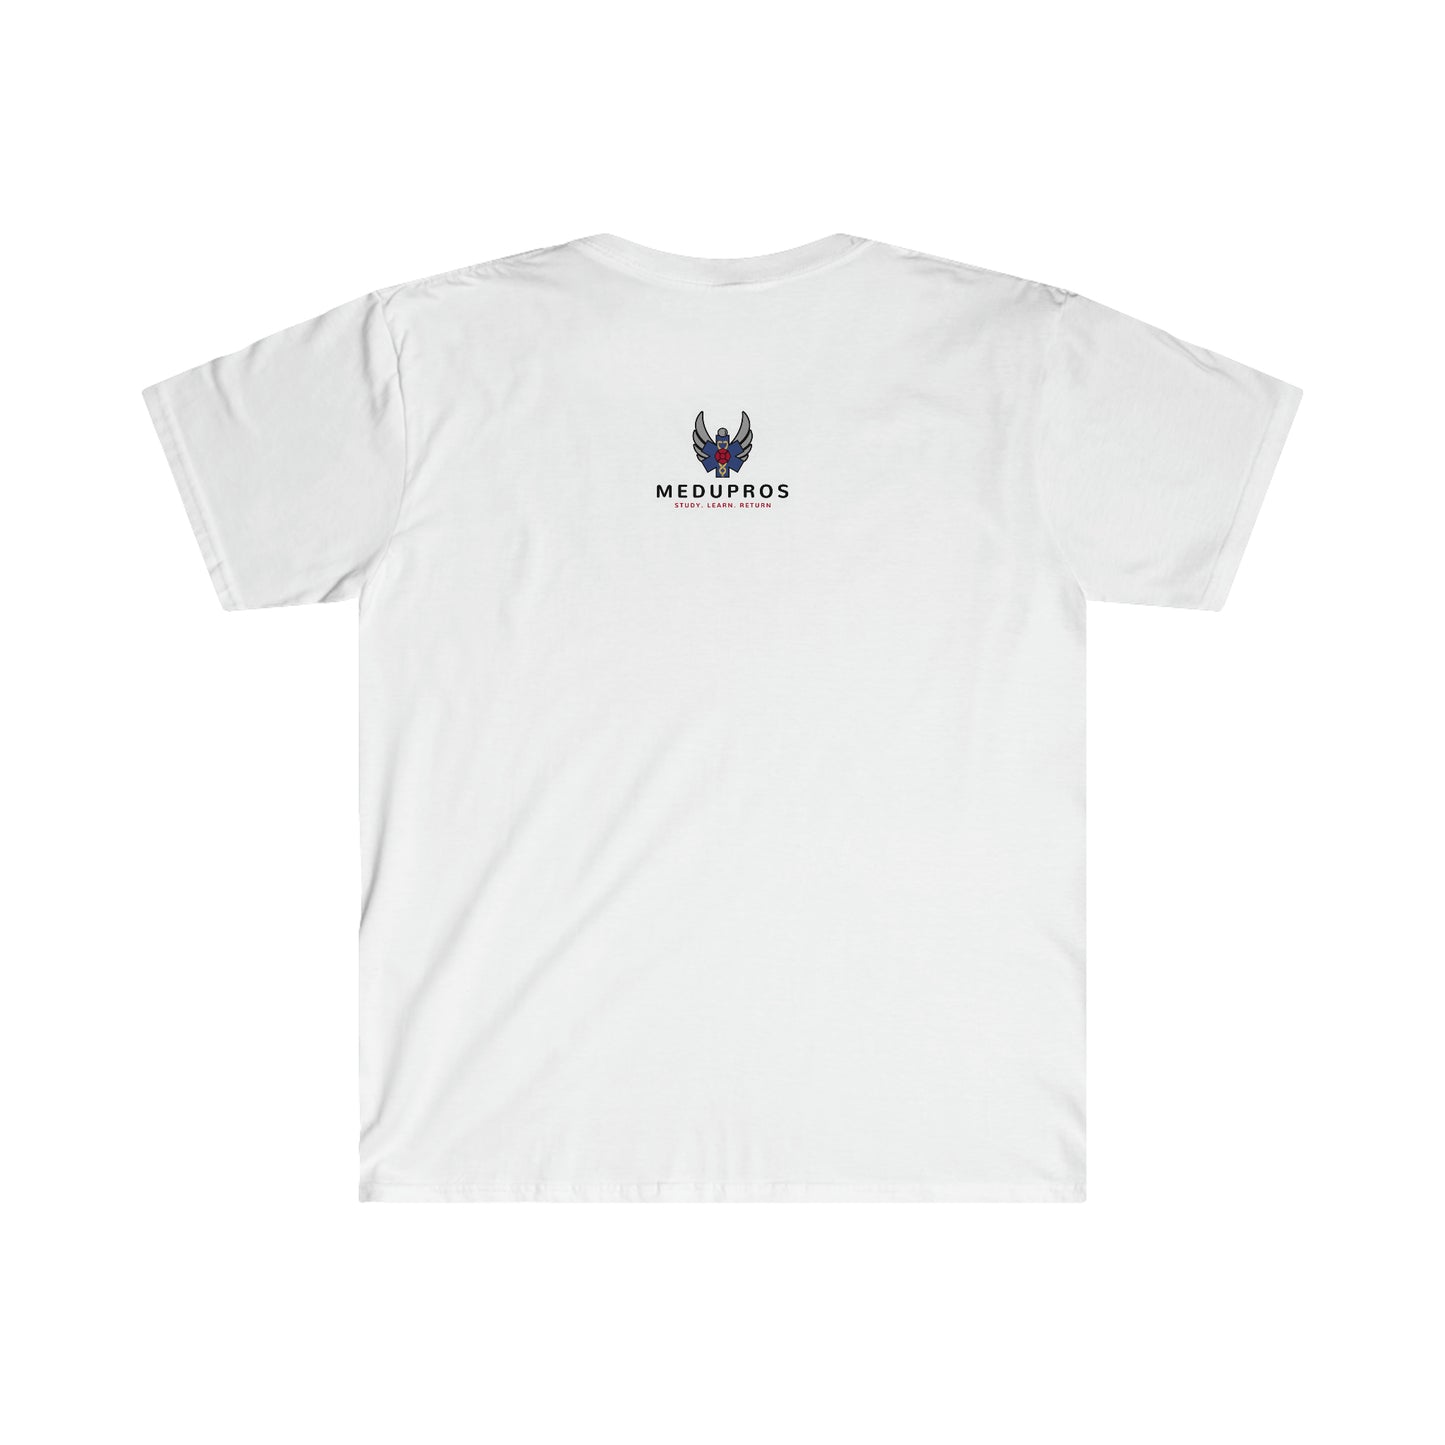 Just the Tip T-Shirt